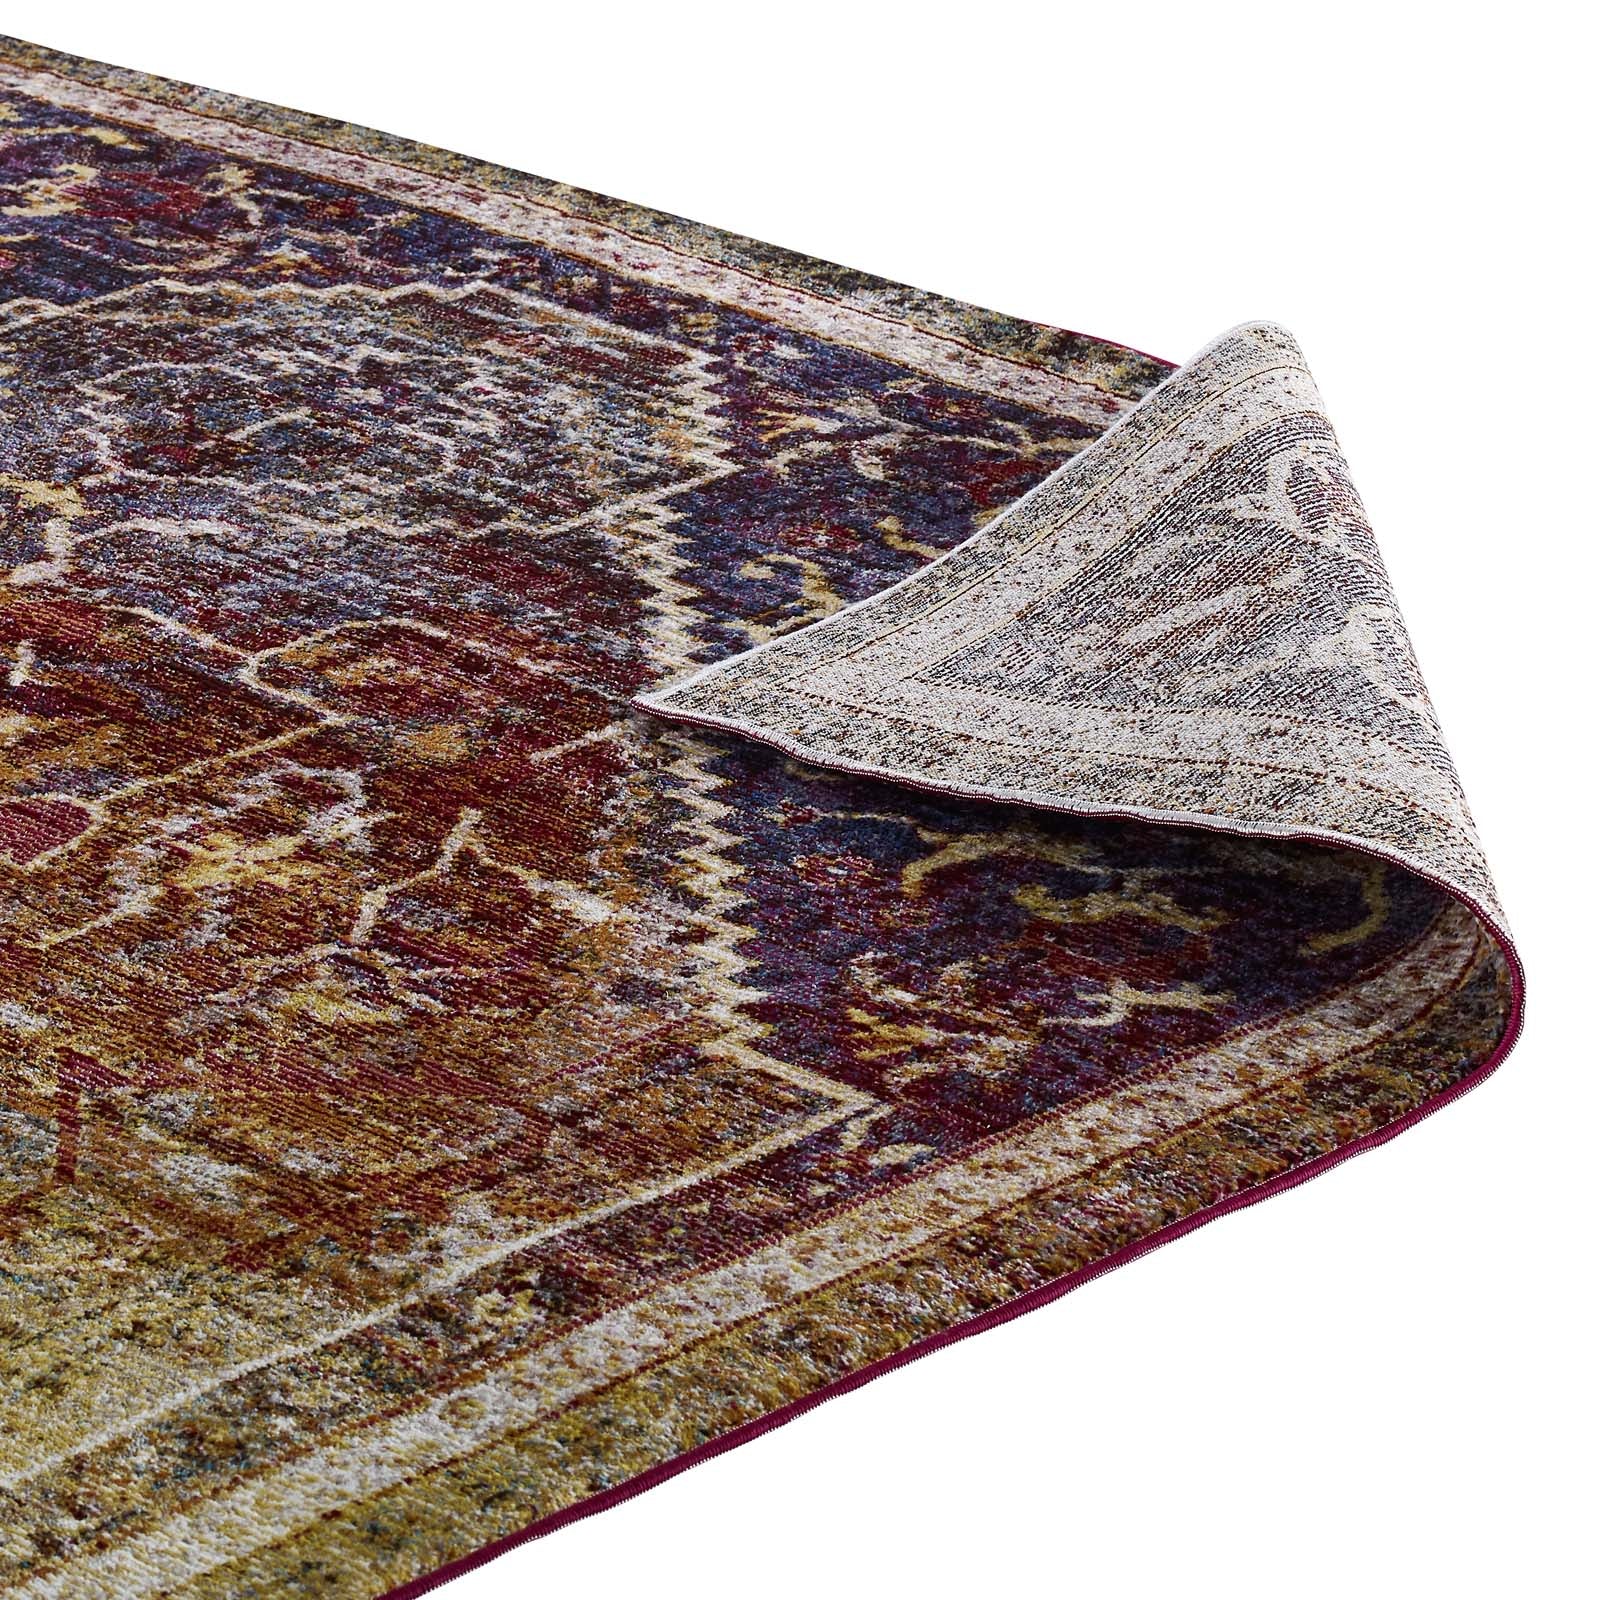 Success Kaede Transitional Distressed Vintage Floral Persian Medallion 4x6 Area Rug - East Shore Modern Home Furnishings